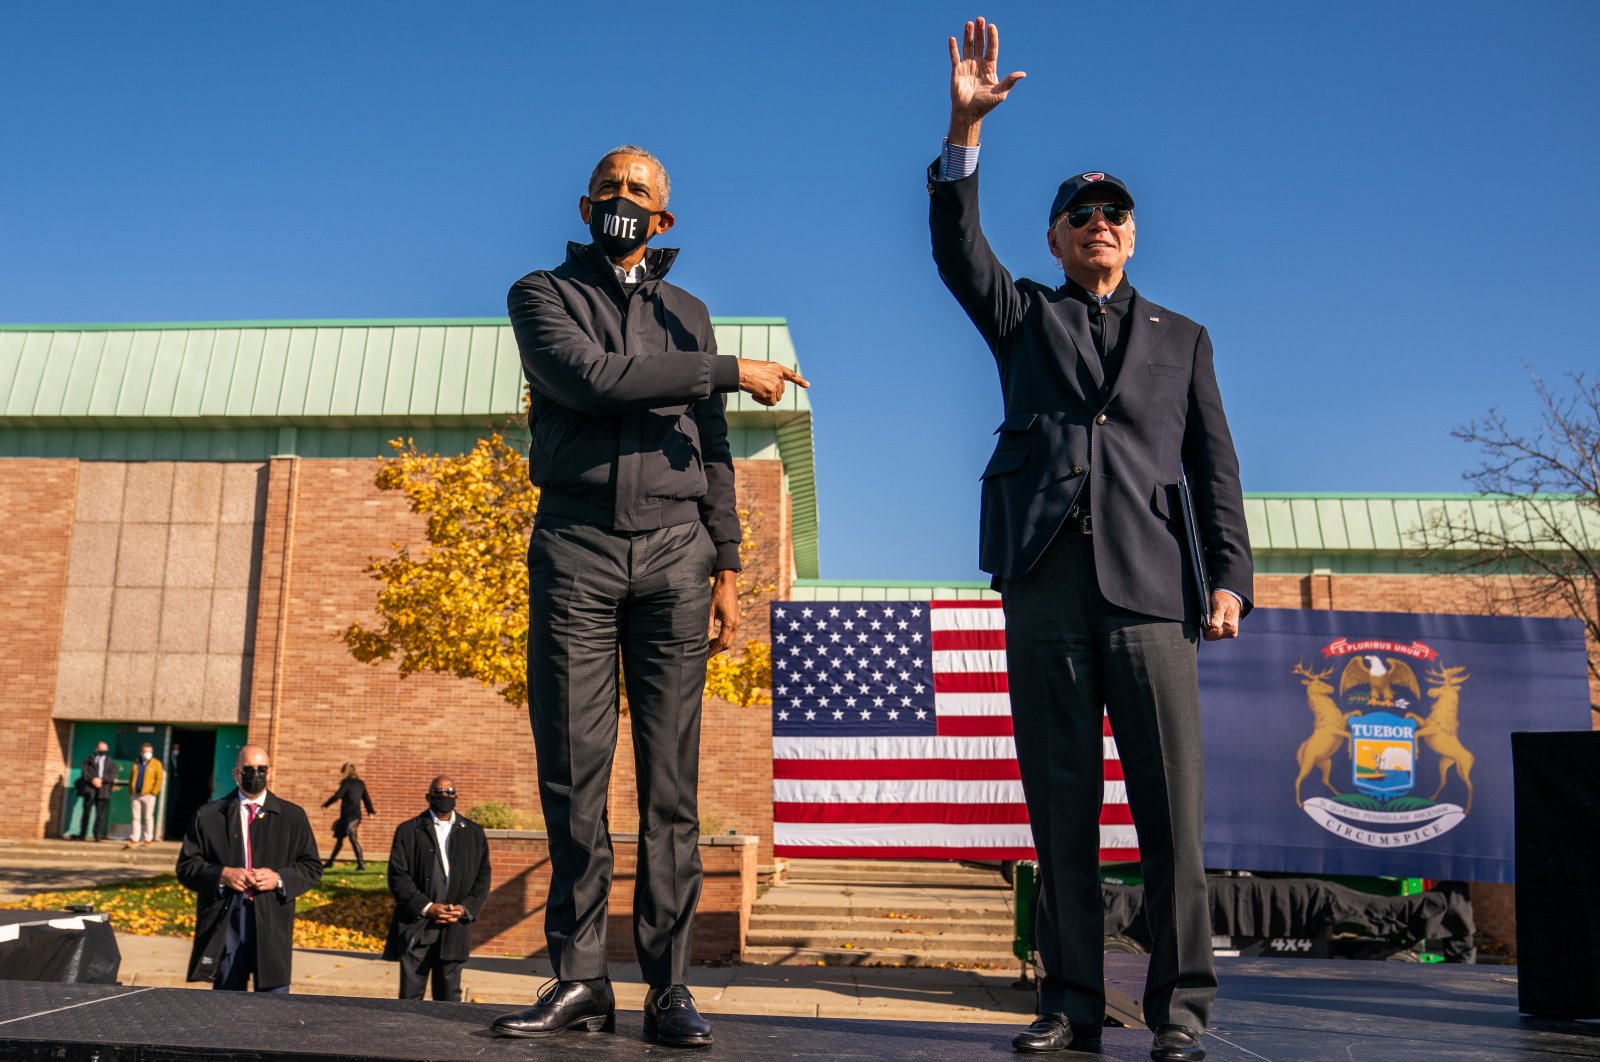 Democrats' presidential candidate Joe Biden and former President Barack Obama on stage during a meeting for Biden's election campaign at Northwestern High School in Flint, Michigan, U.S., Oct. 31, 2020. (Photo by Getty Images)

(Photo by Demetrius Freeman/The Washington Post via Getty Images)